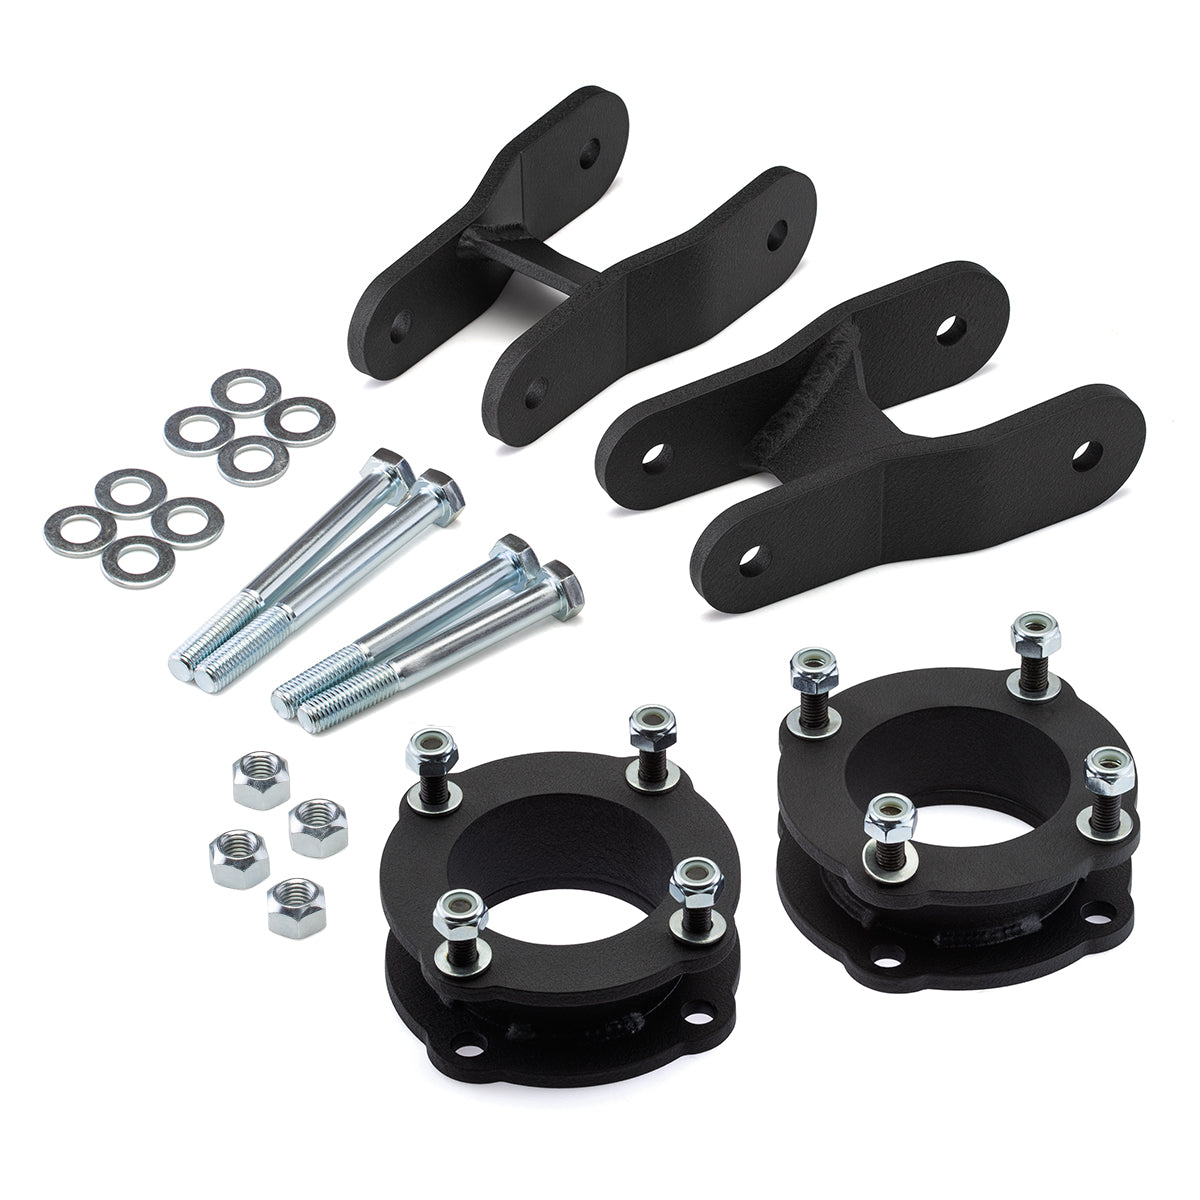 2007 - 2020 TOYOTA TUNDRA Full Front Spacers + Rear Steel Shackle Lift Kit